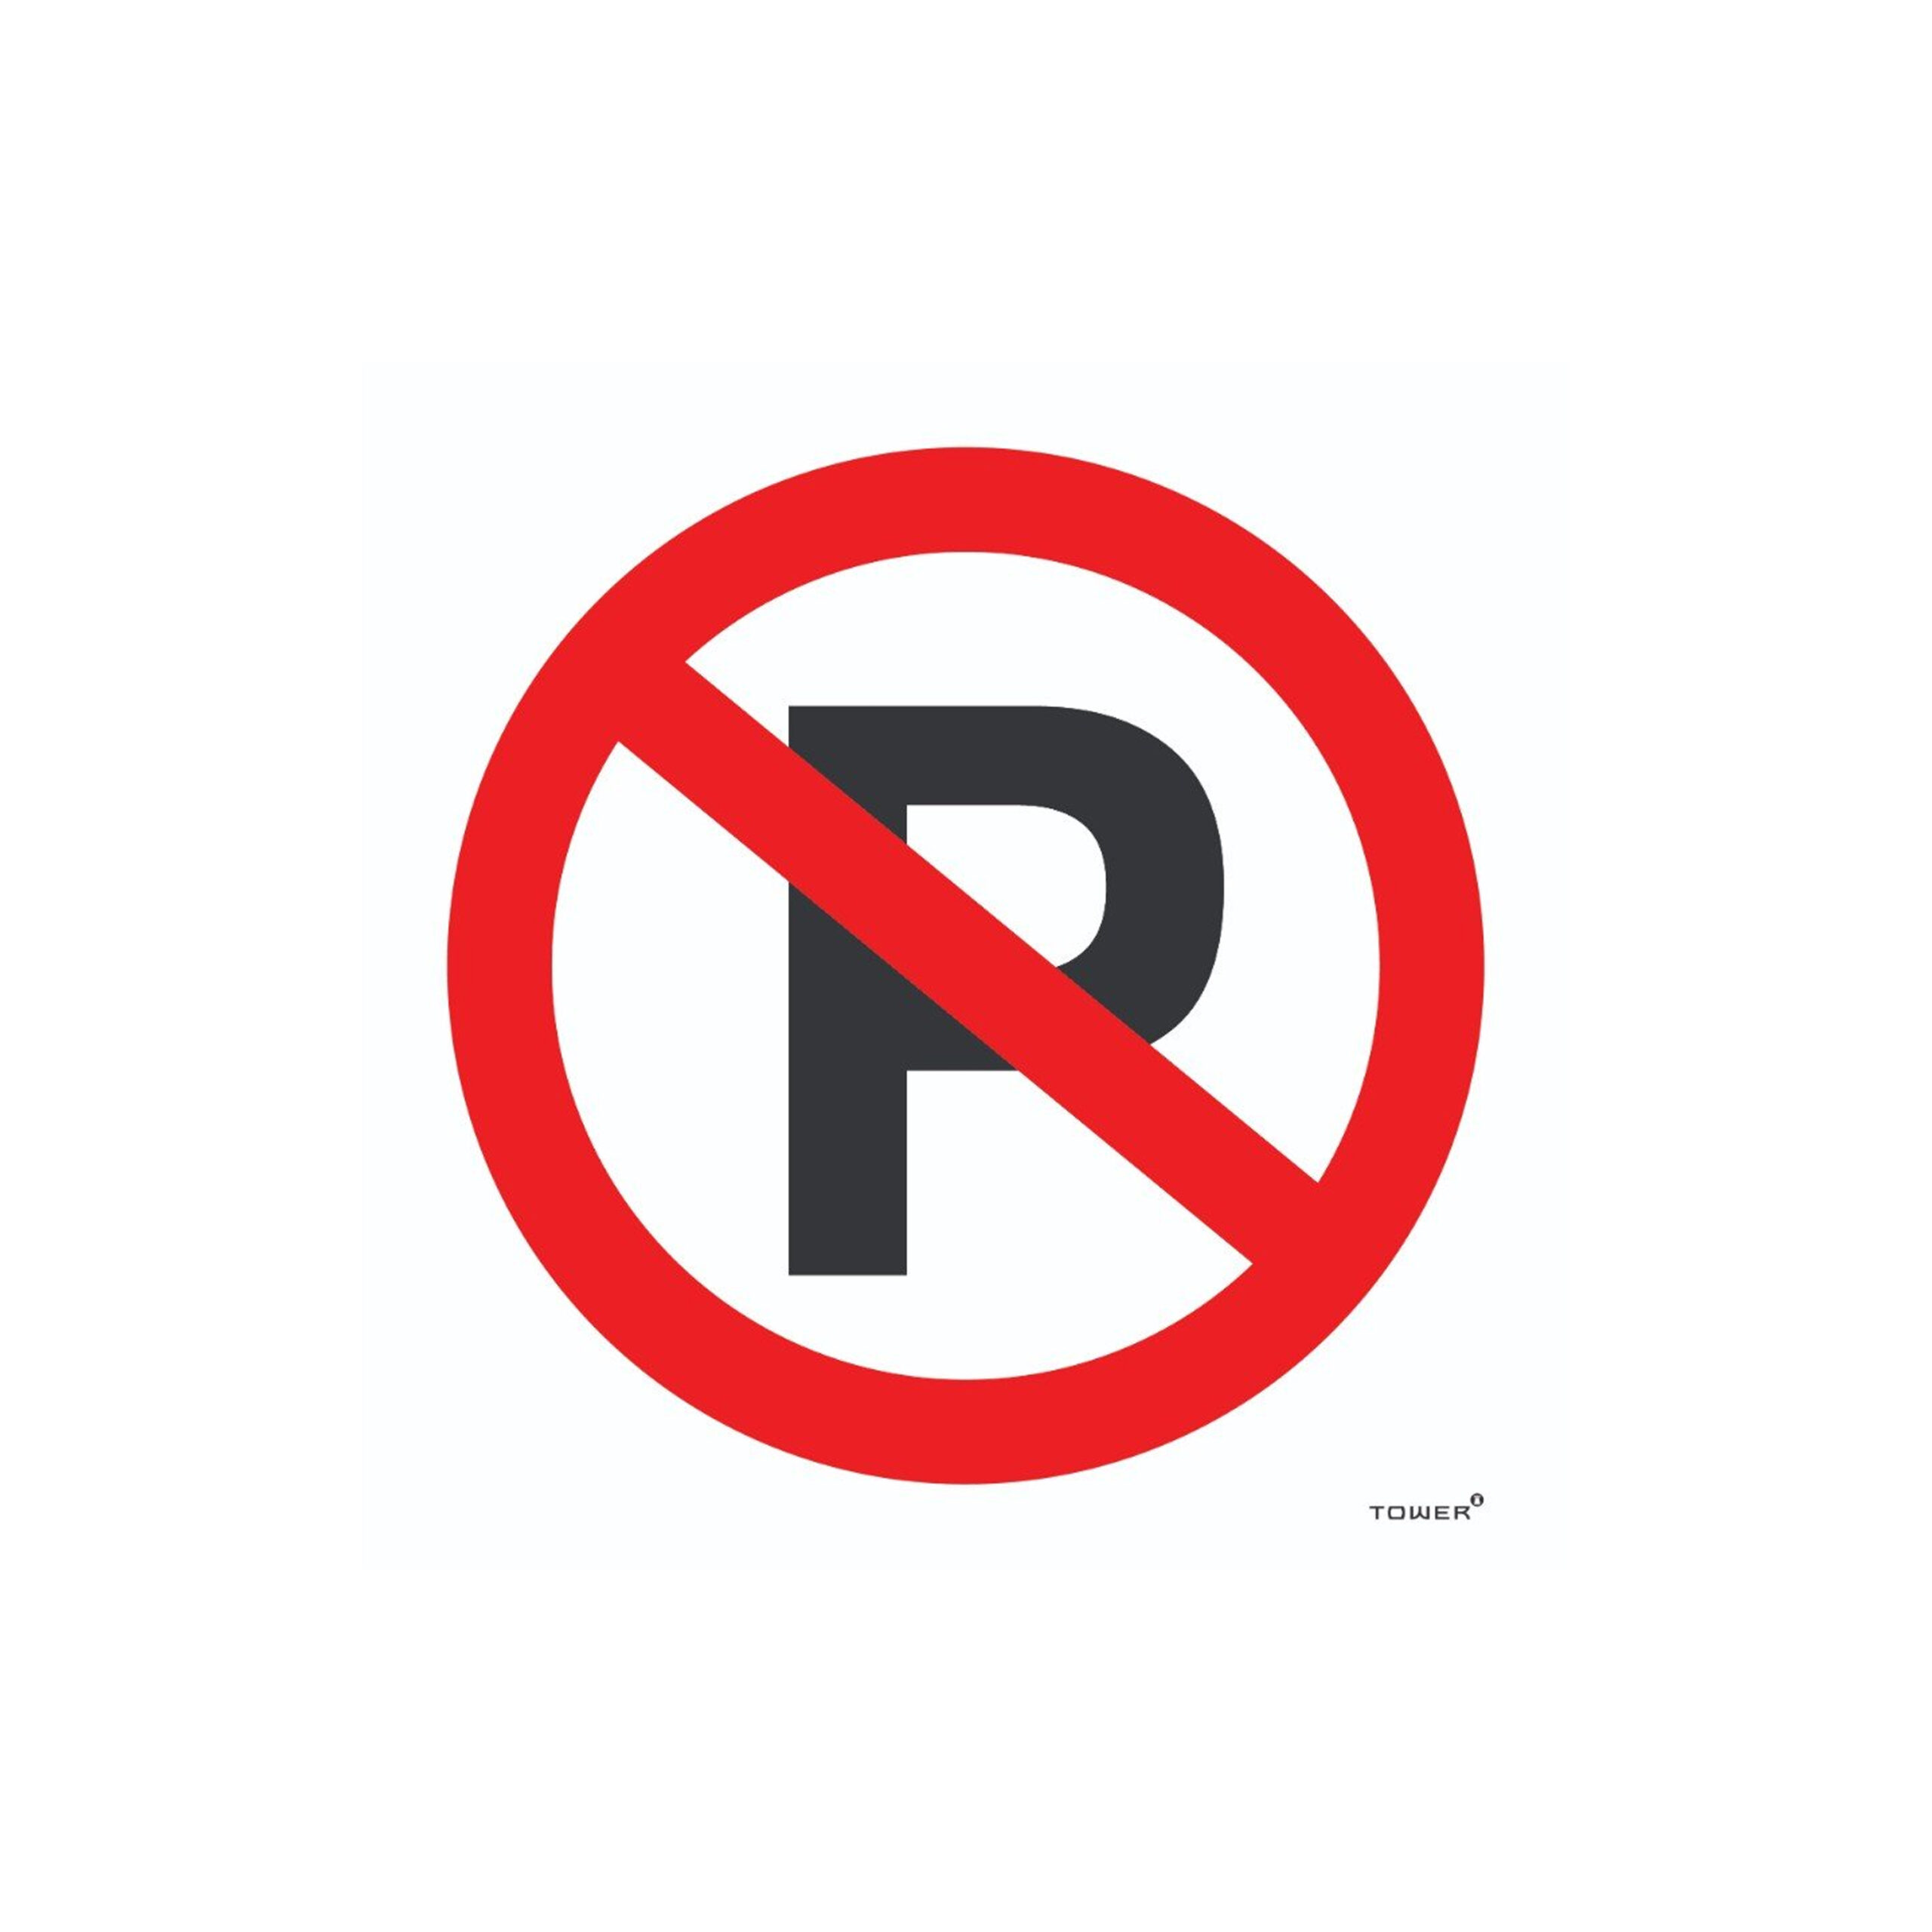 TOWER  "NO
PARKING"
SIGNAGE 
150x150mm